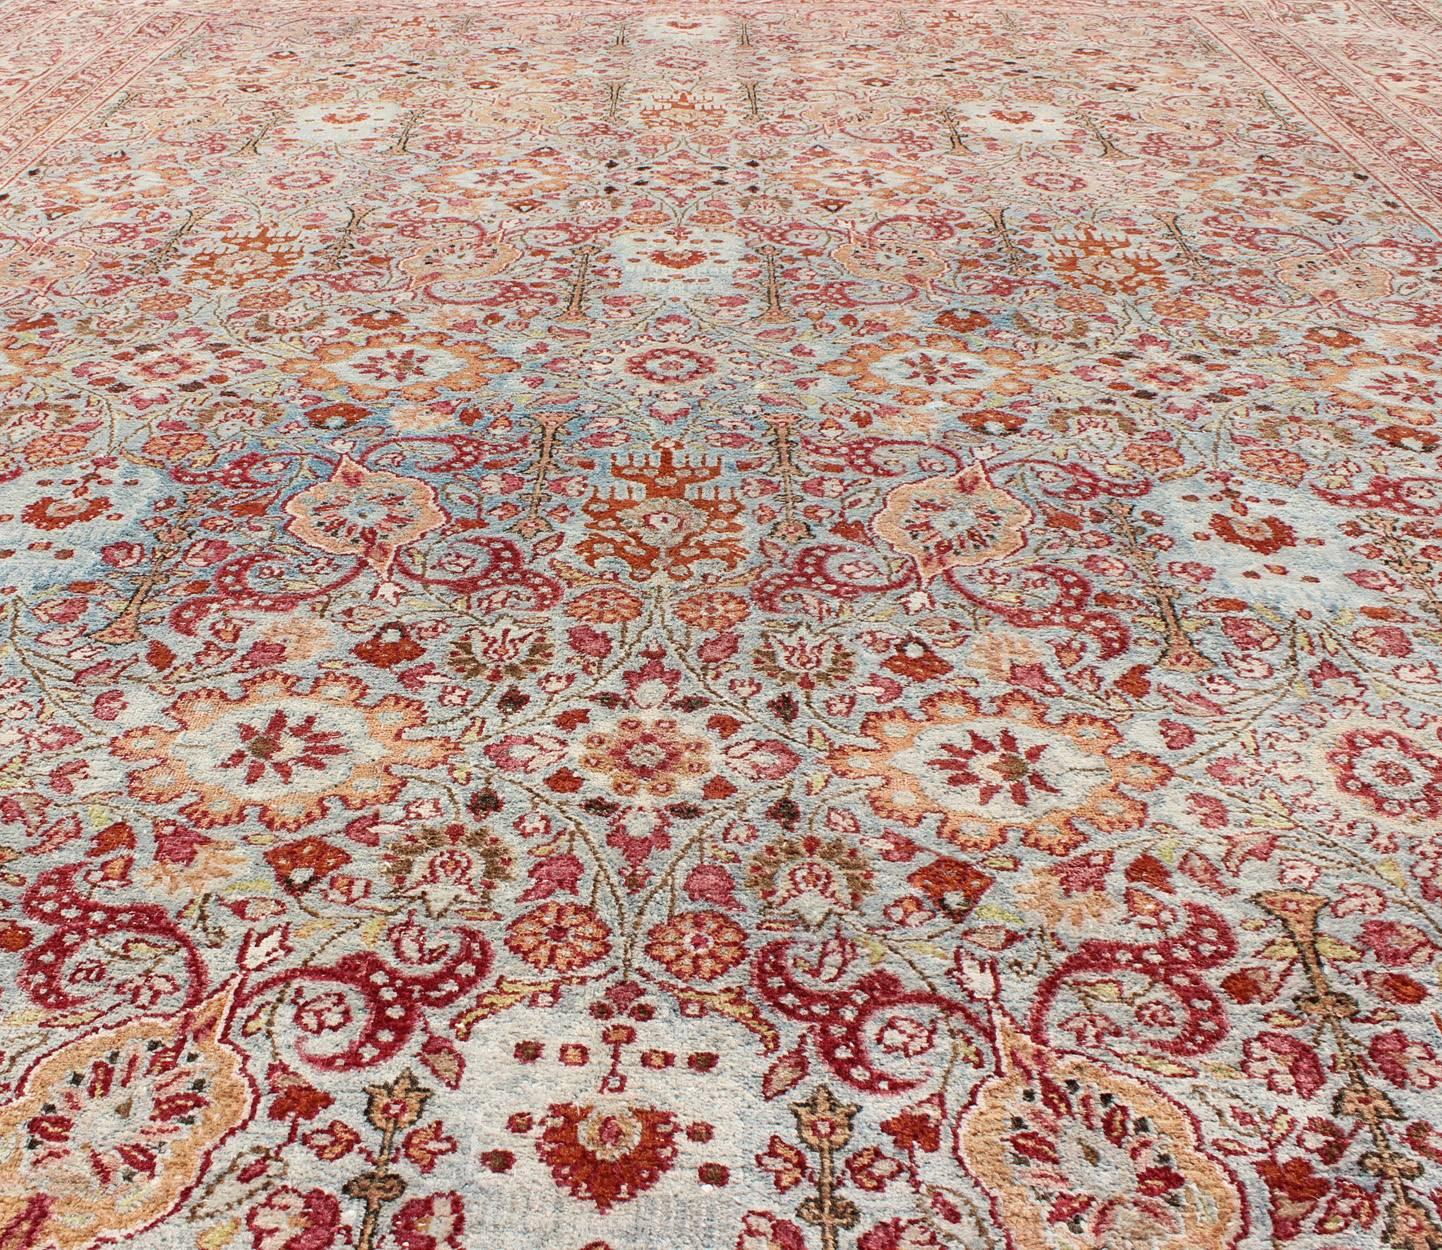 Ornate Floral Pattern Khorassan Antique Persian Rug in Burgundy & Gray In Excellent Condition For Sale In Atlanta, GA